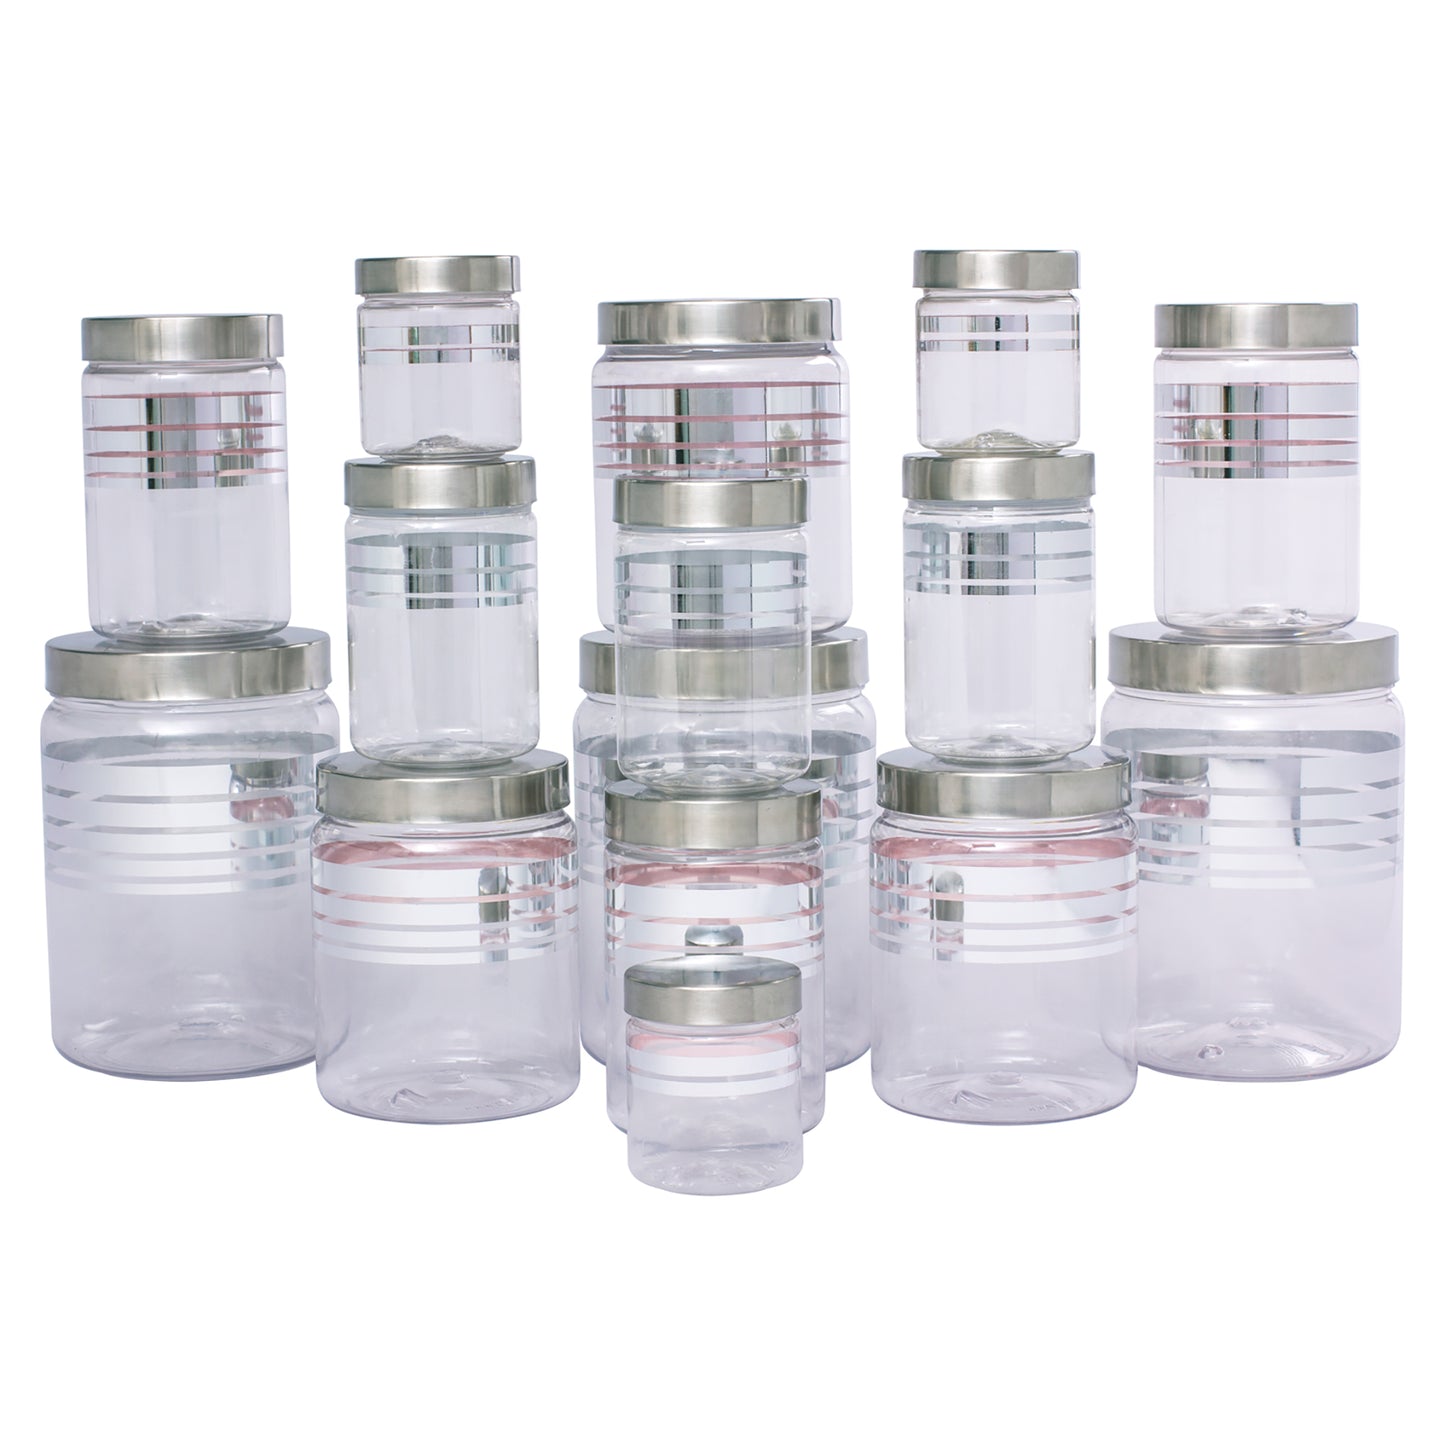 Silver Line Container - Pack of 15 - 2000ml, 1000ml, 750ml, 200ml, 100ml